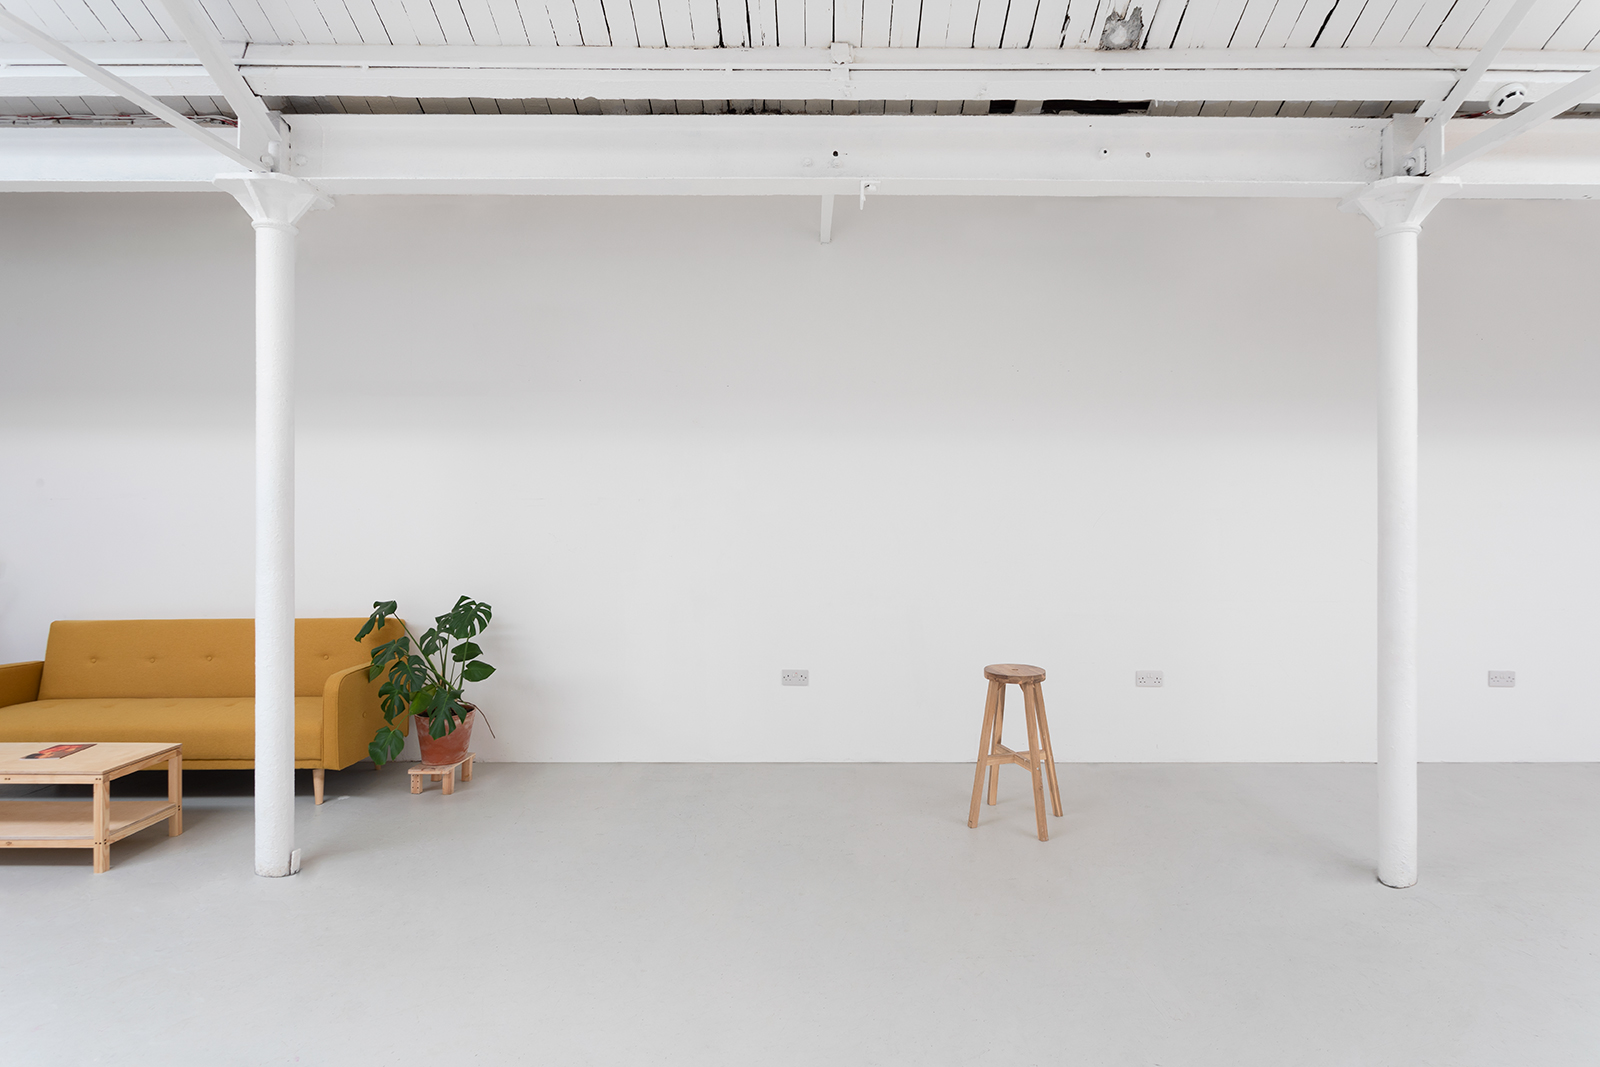 East London, London, Photography Studio, Film Studio, Hire, Rent, Rental, Photo Studio, Too Young Too Simple Studio, Photography Studio Hire, Professional, Free Equipment Included, 1200sqft, The Space